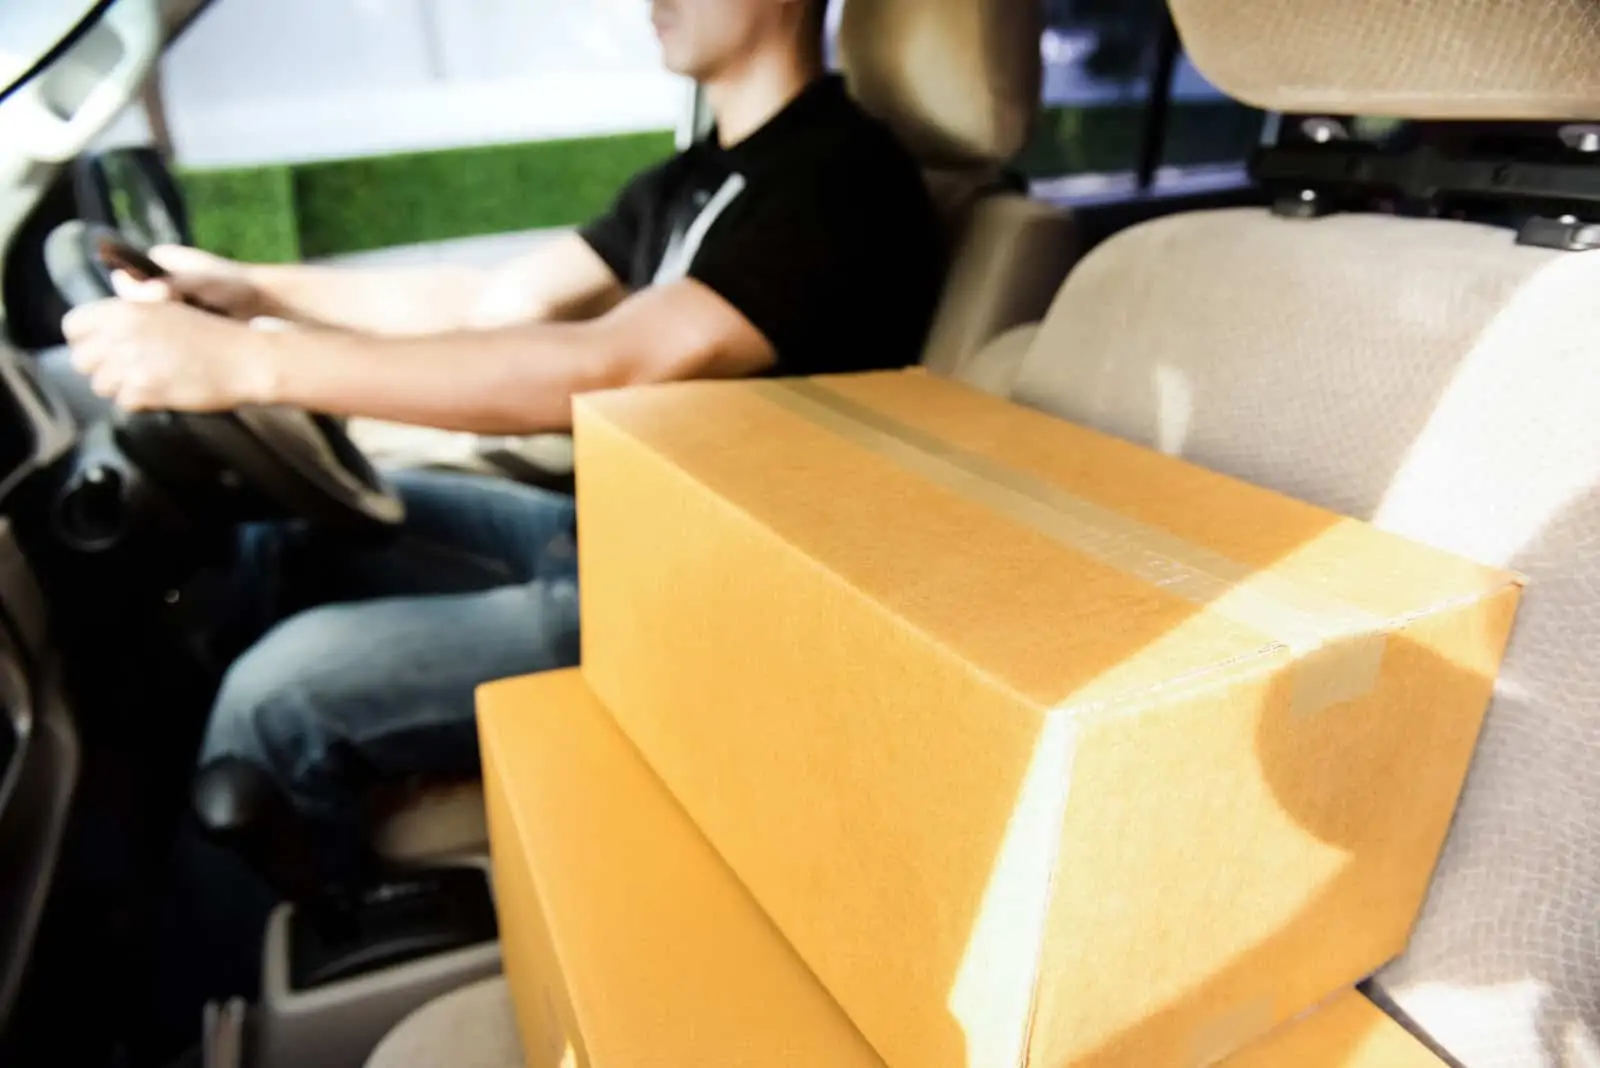 Packages stacked up in front seat of car